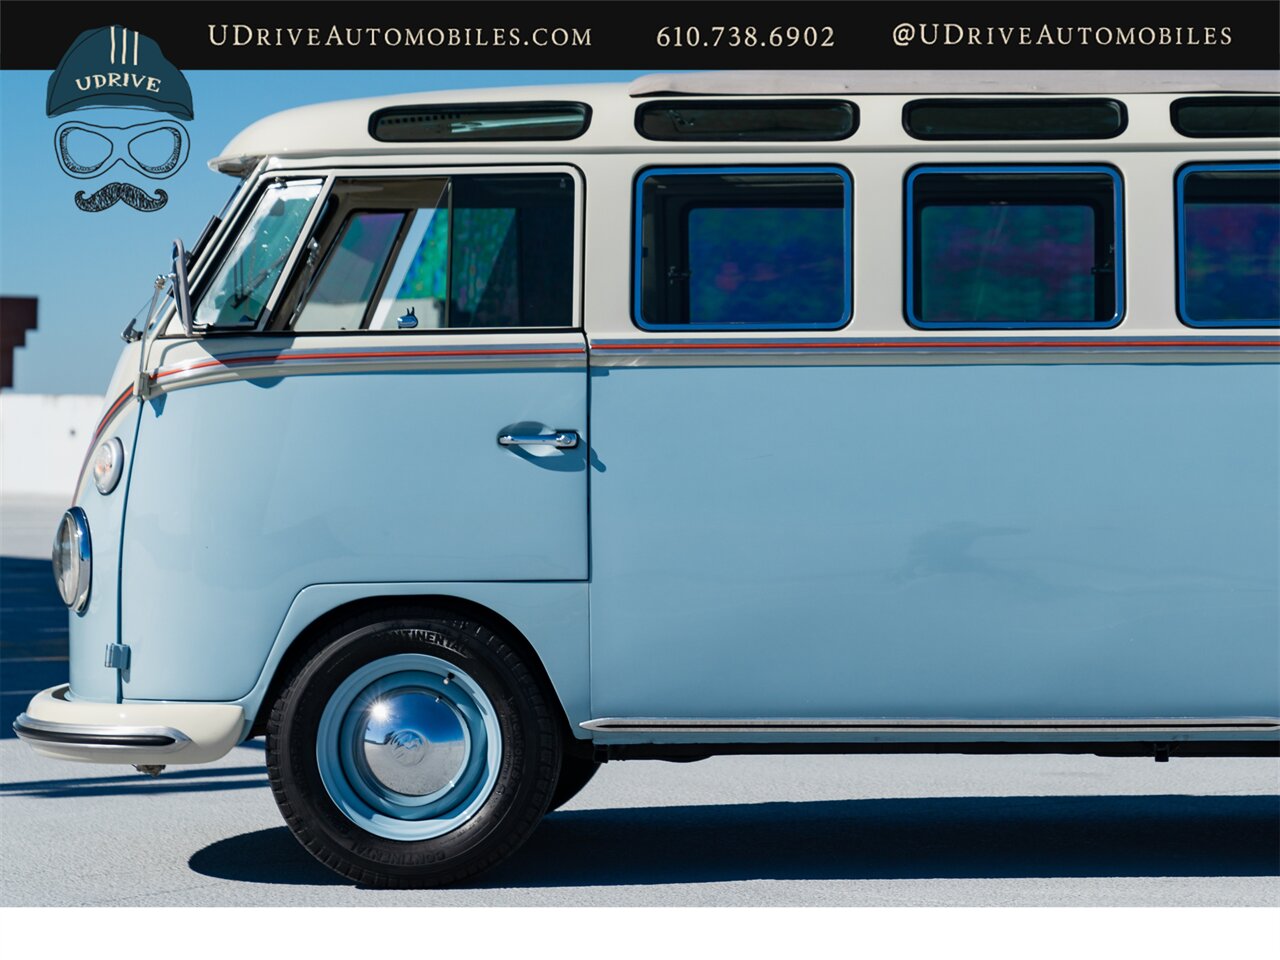 1965 Volkswagen Bus/Vanagon 21 Window Deluxe Transporter  Built By East Coast VW Restorations 1914cc A/C - Photo 11 - West Chester, PA 19382